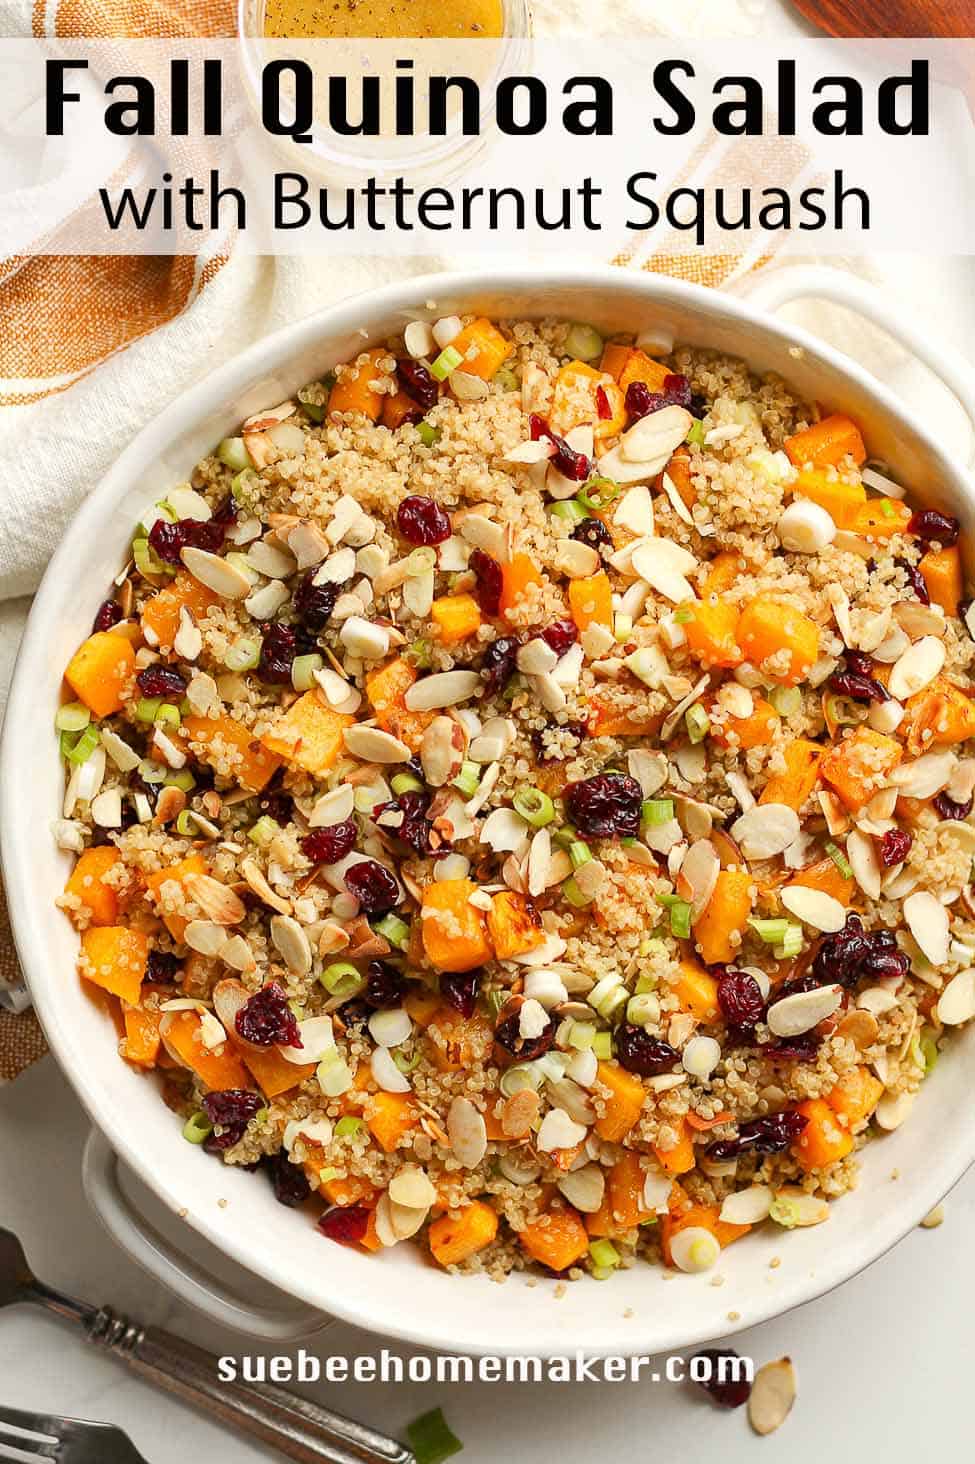 A round serving bowl of fall quinoa salad with butternut squash.